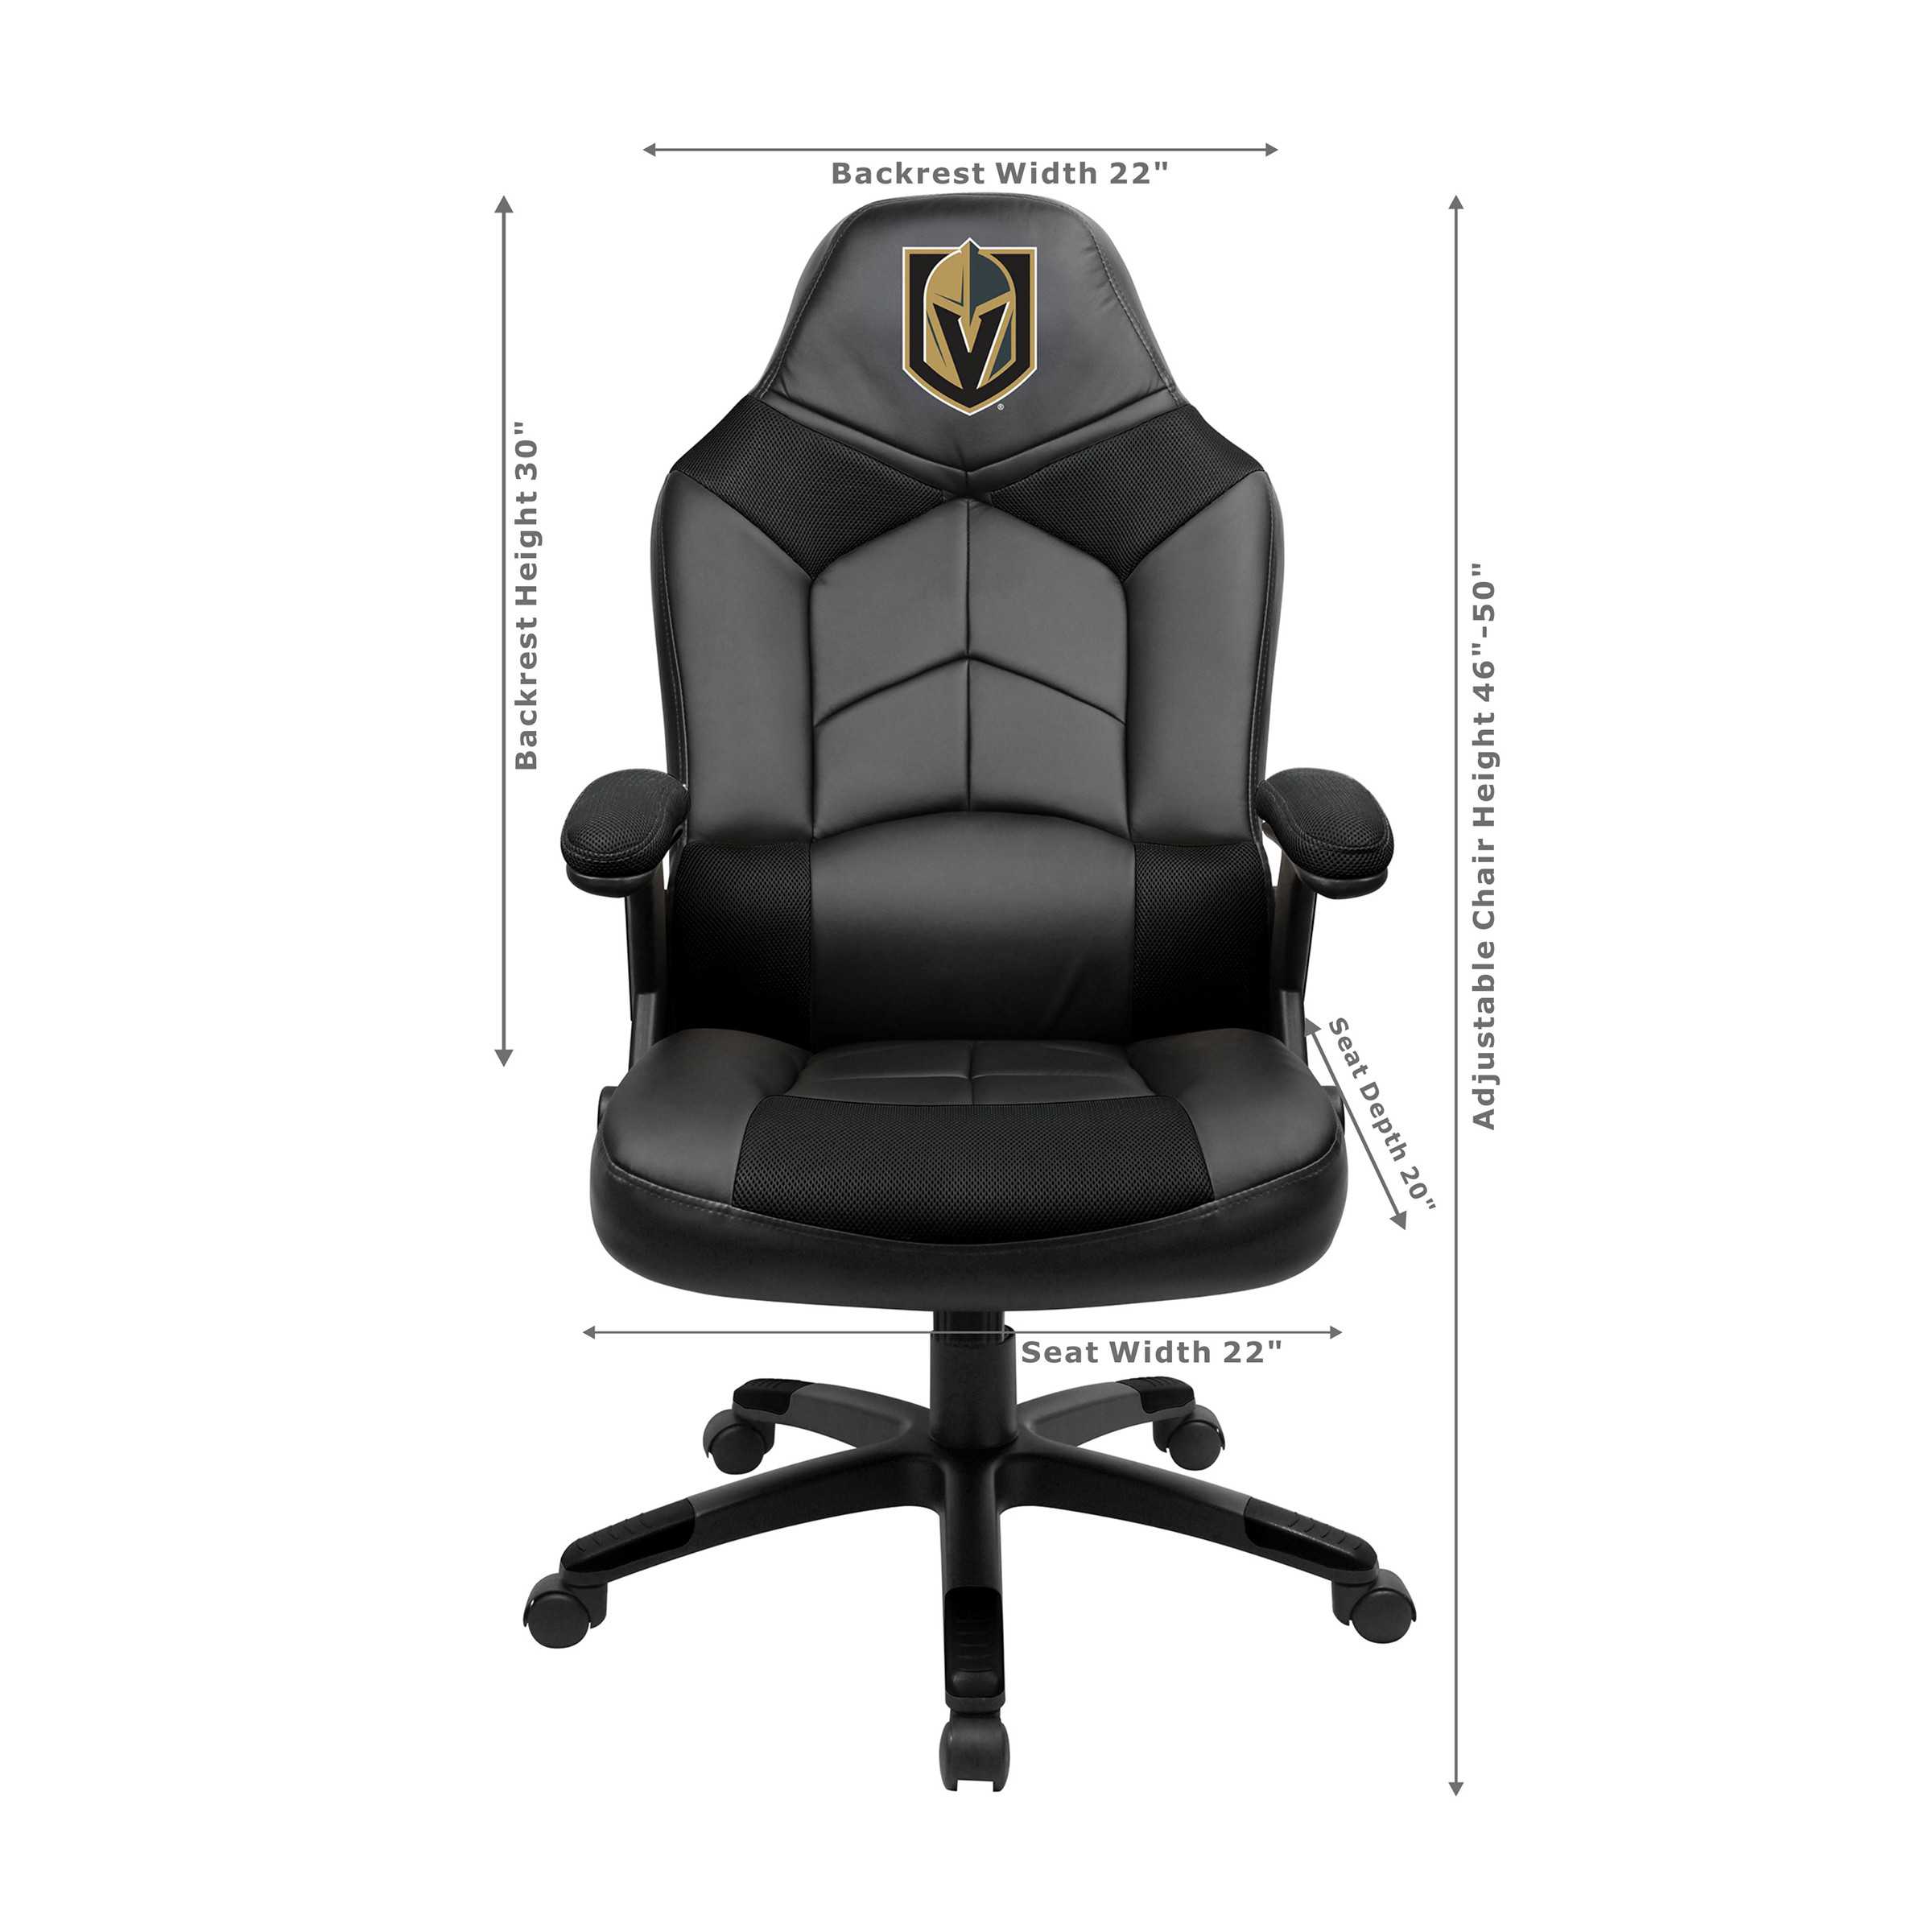 GOLDEN KNIGHTS OVERSIZED GAME CHAIR